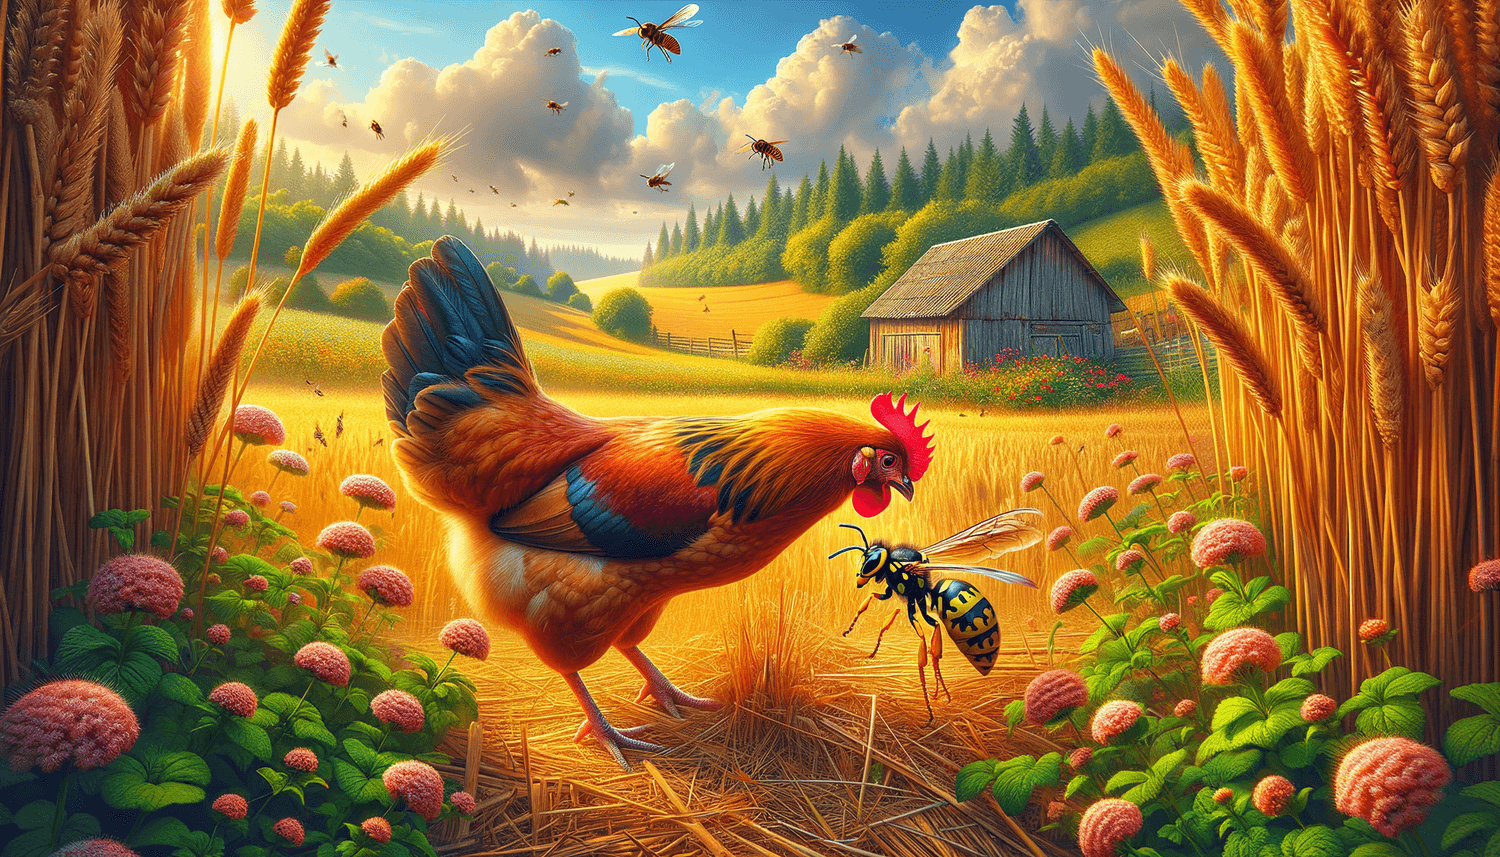 Can Chickens Eat Wasps?